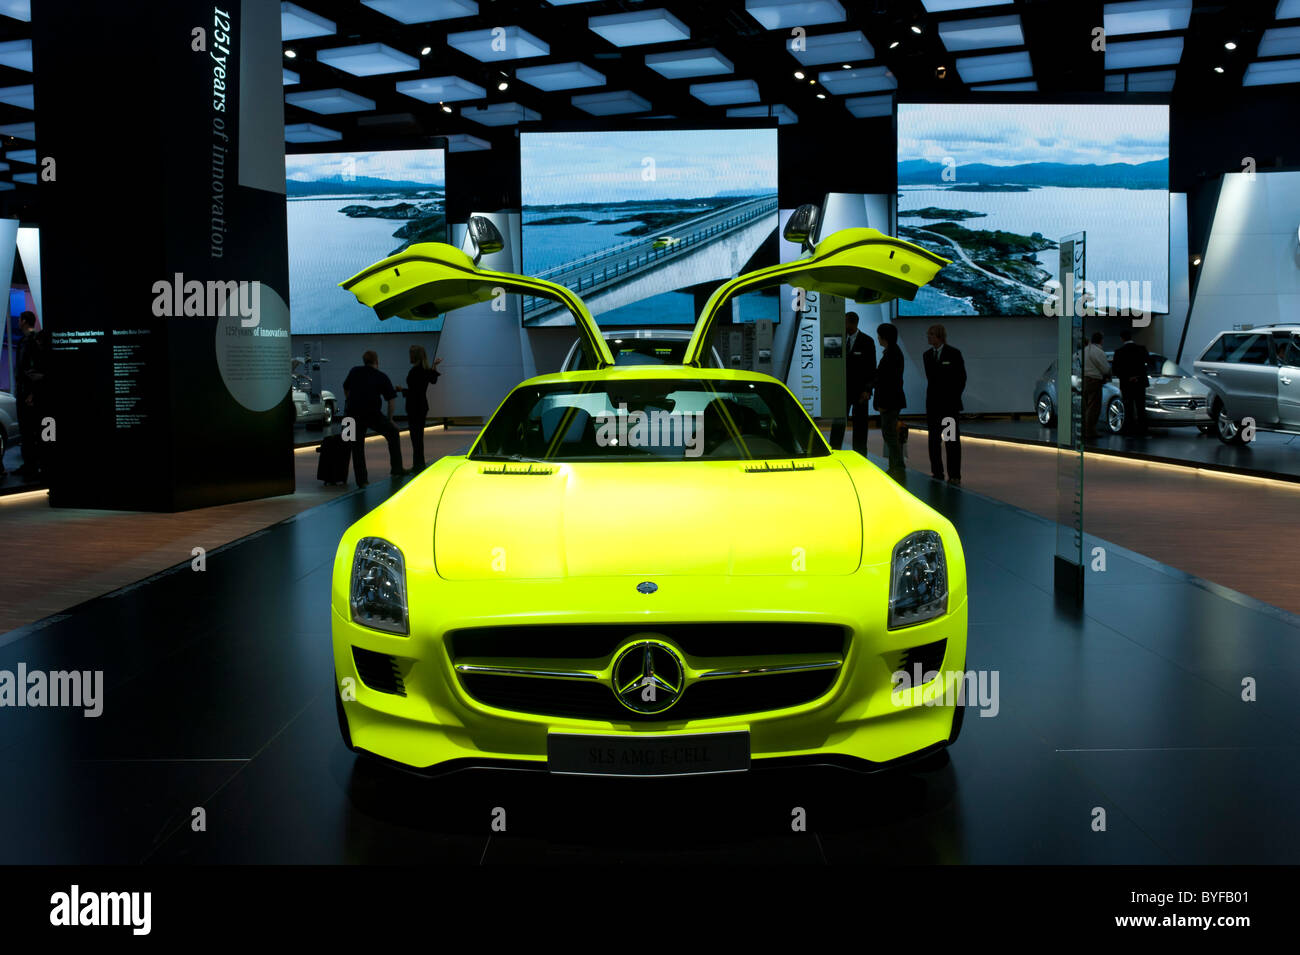 Mercedes-Benz SLS AMG E-Cell electric sports car at the 2011 North American International Auto Show in Detroit Stock Photo